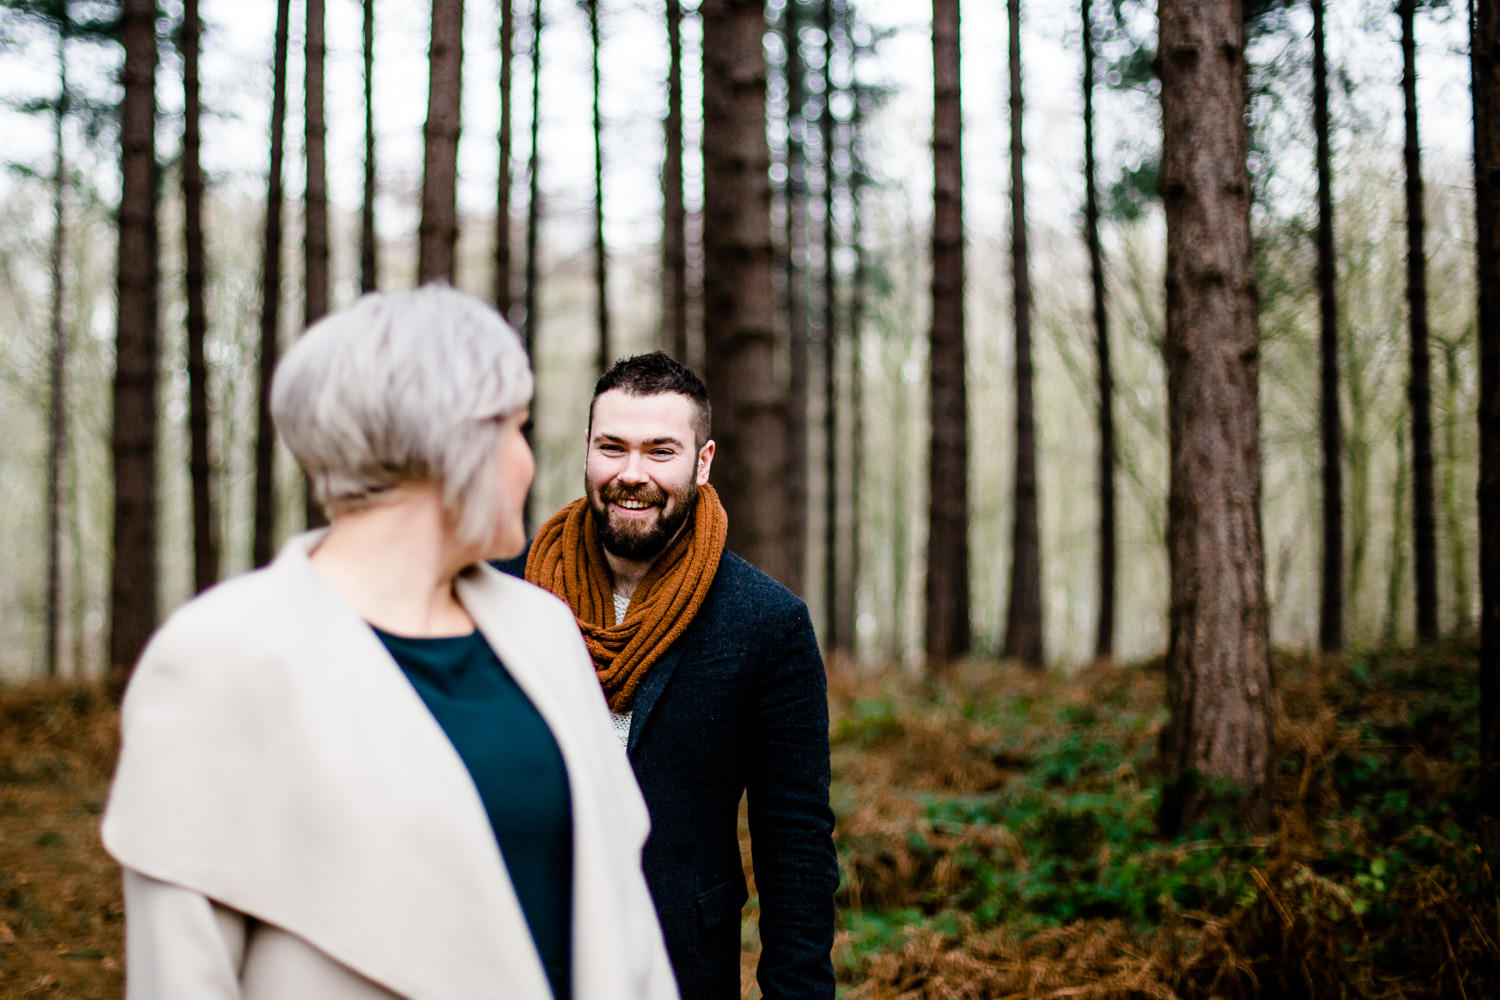 man and woman looking at each other stood among pine trees